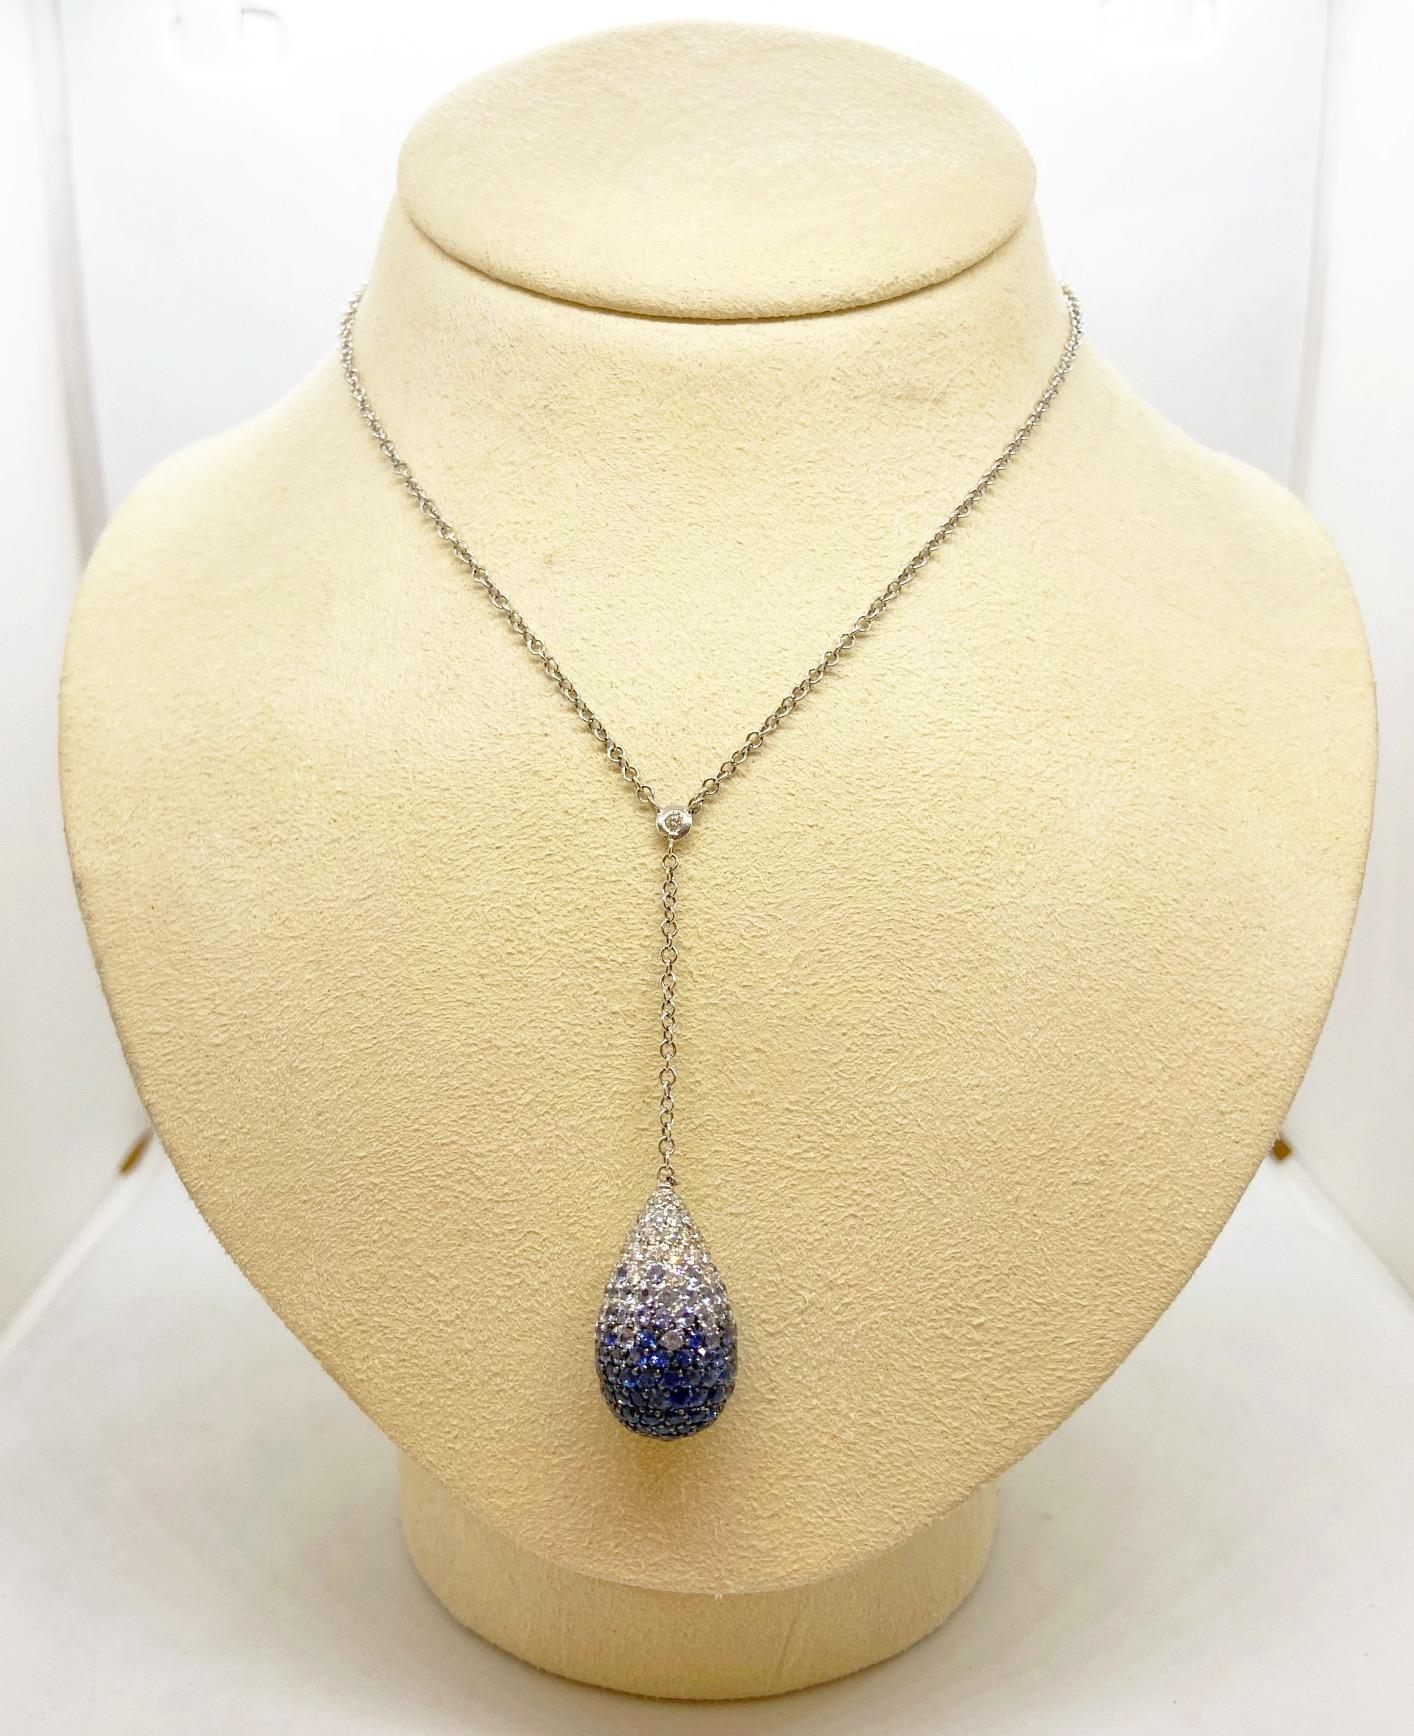 18-karat white gold necklace, with a dew drop pendant graduating in color from white diamond to light shades to darker blue sapphire pavé, on white gold chain with a bezel-set round brilliant white diamond connector.

Blue sapphire weight: